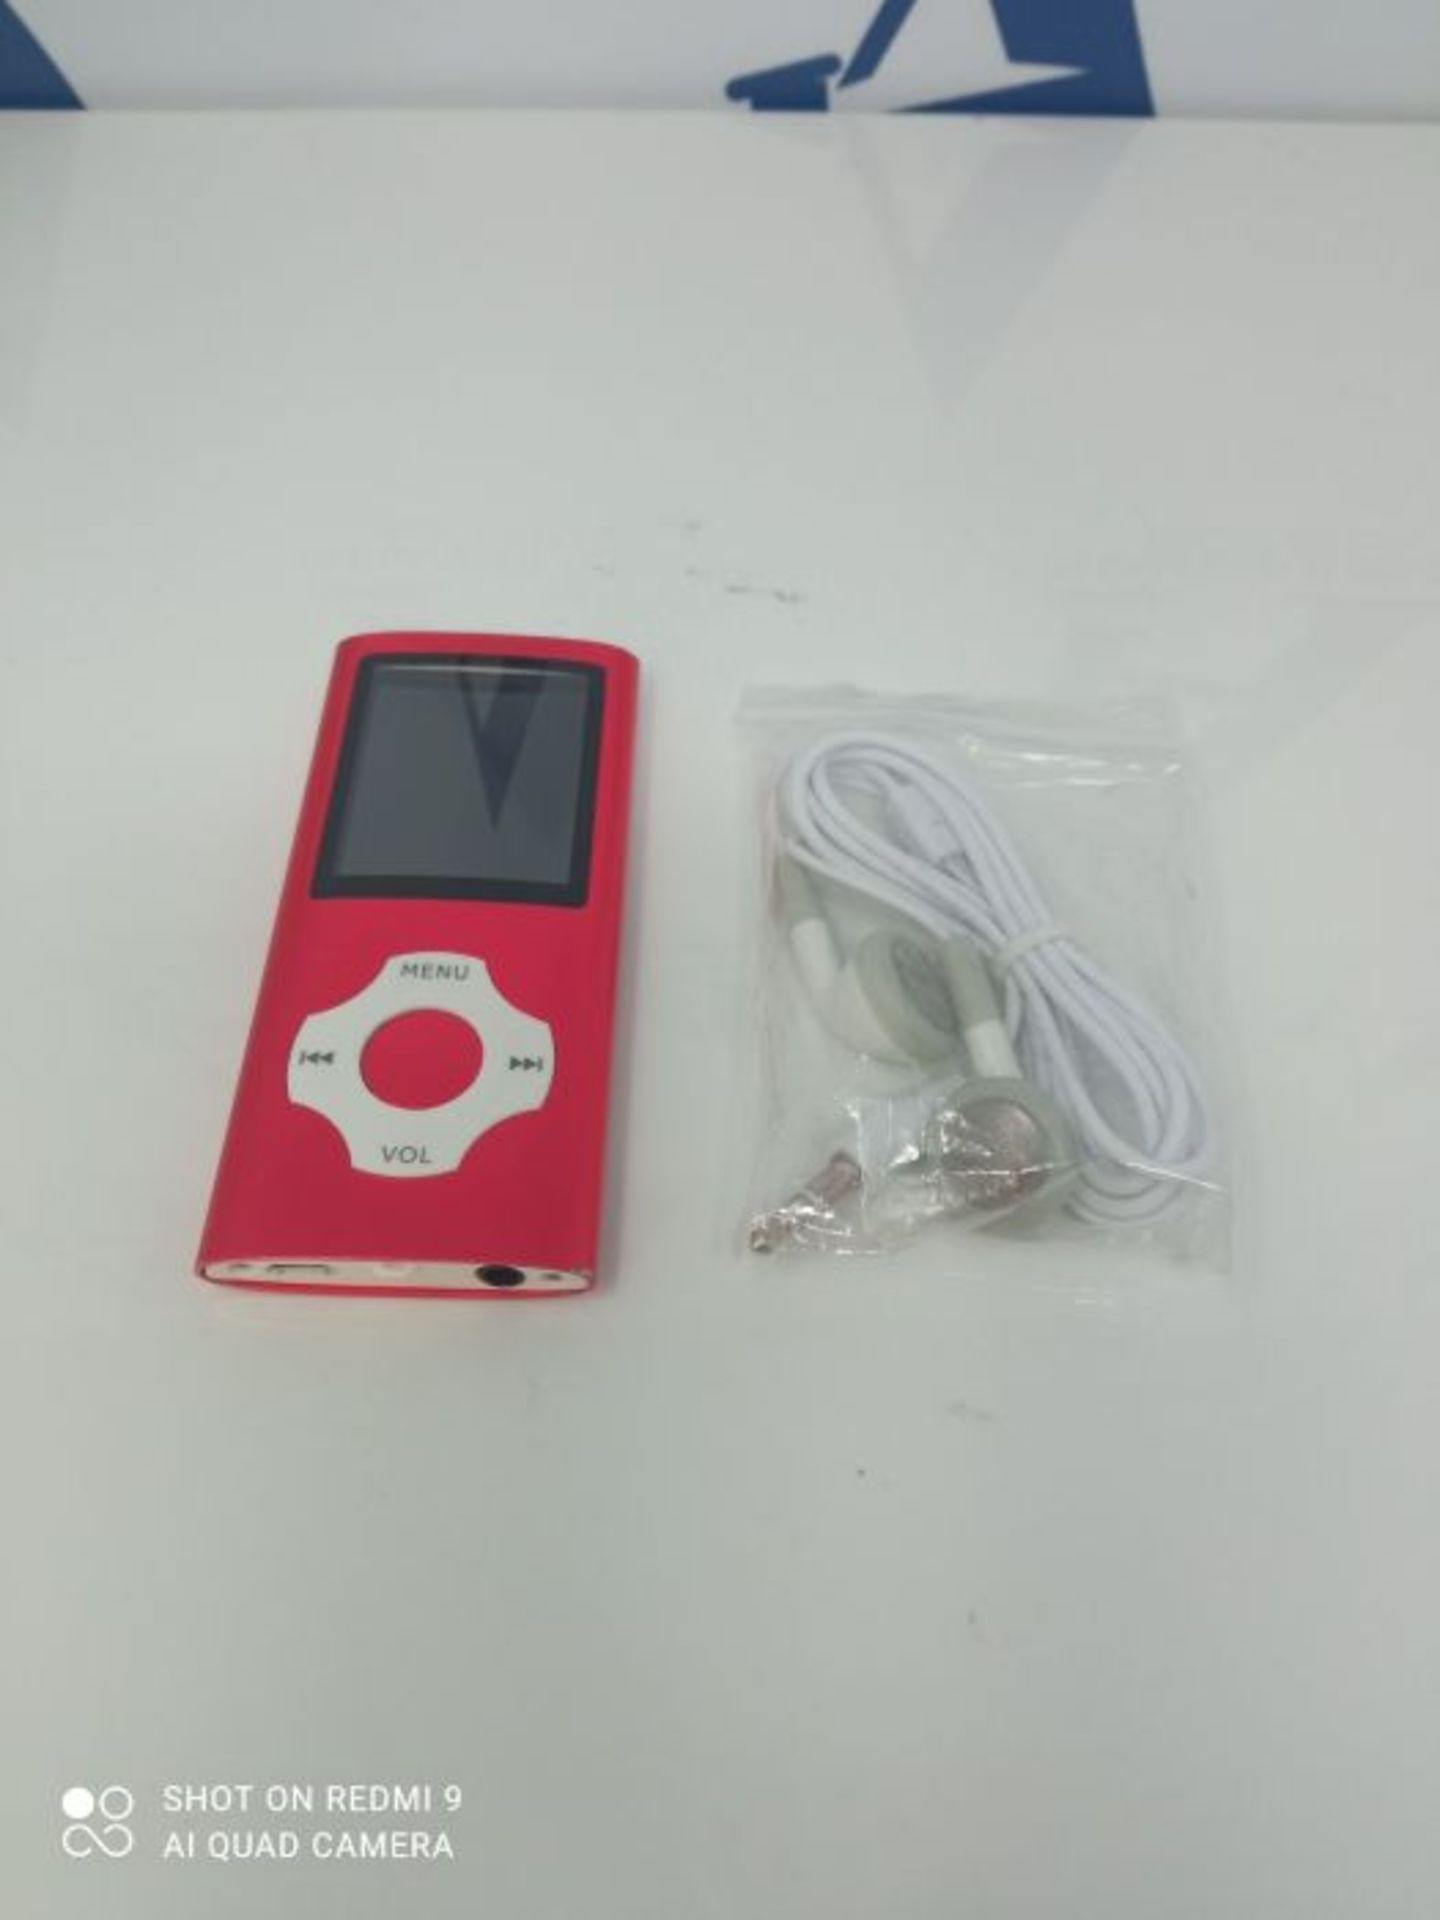 Mymahdi MP3/MP4 Portable Music Player, Photo Viewer,Voice Recorder,FM Radio,E-book,Exp - Image 2 of 2